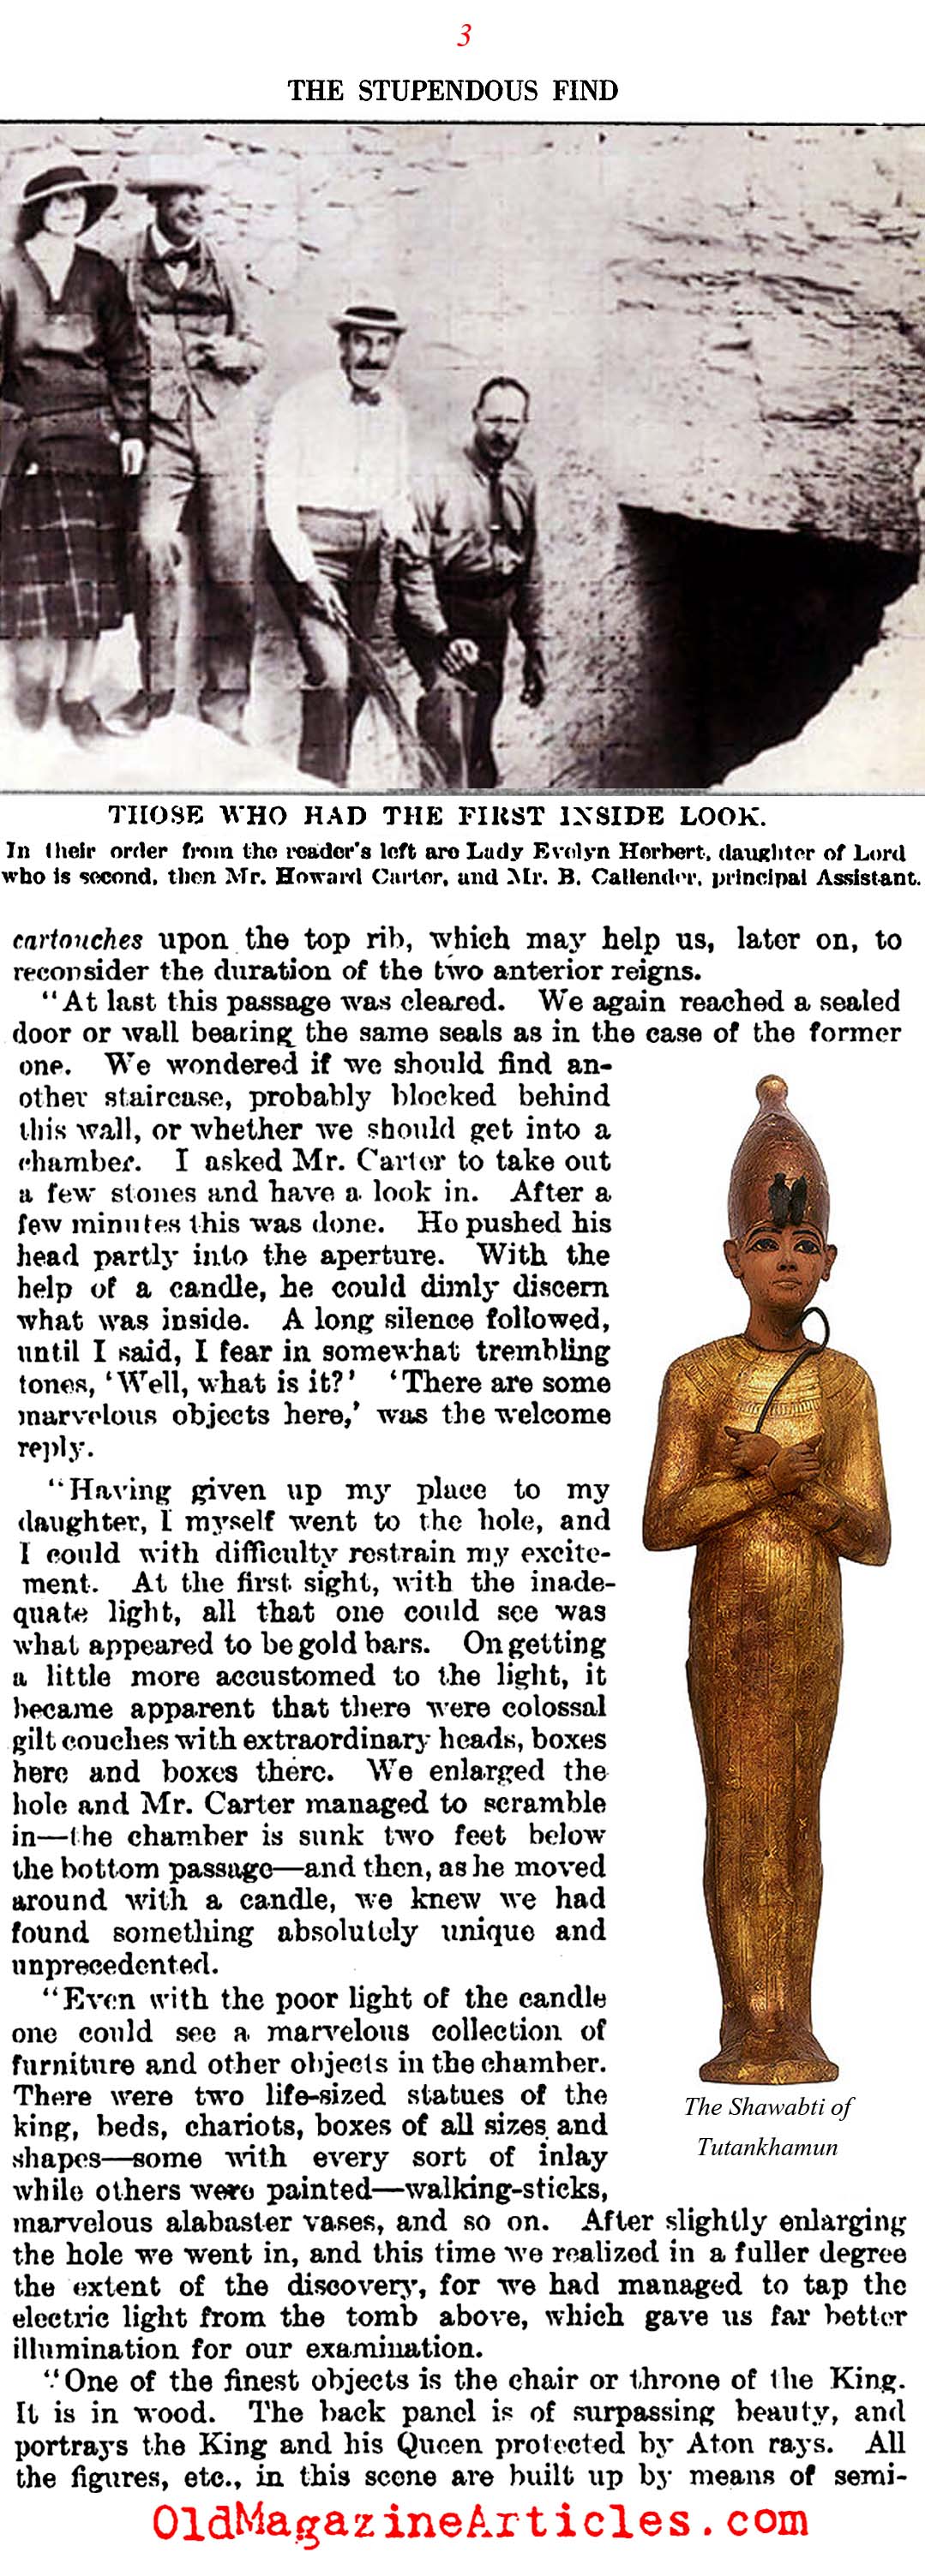 Discovered: The Tomb of King Tutankhamun (Literary Digest, 1923)